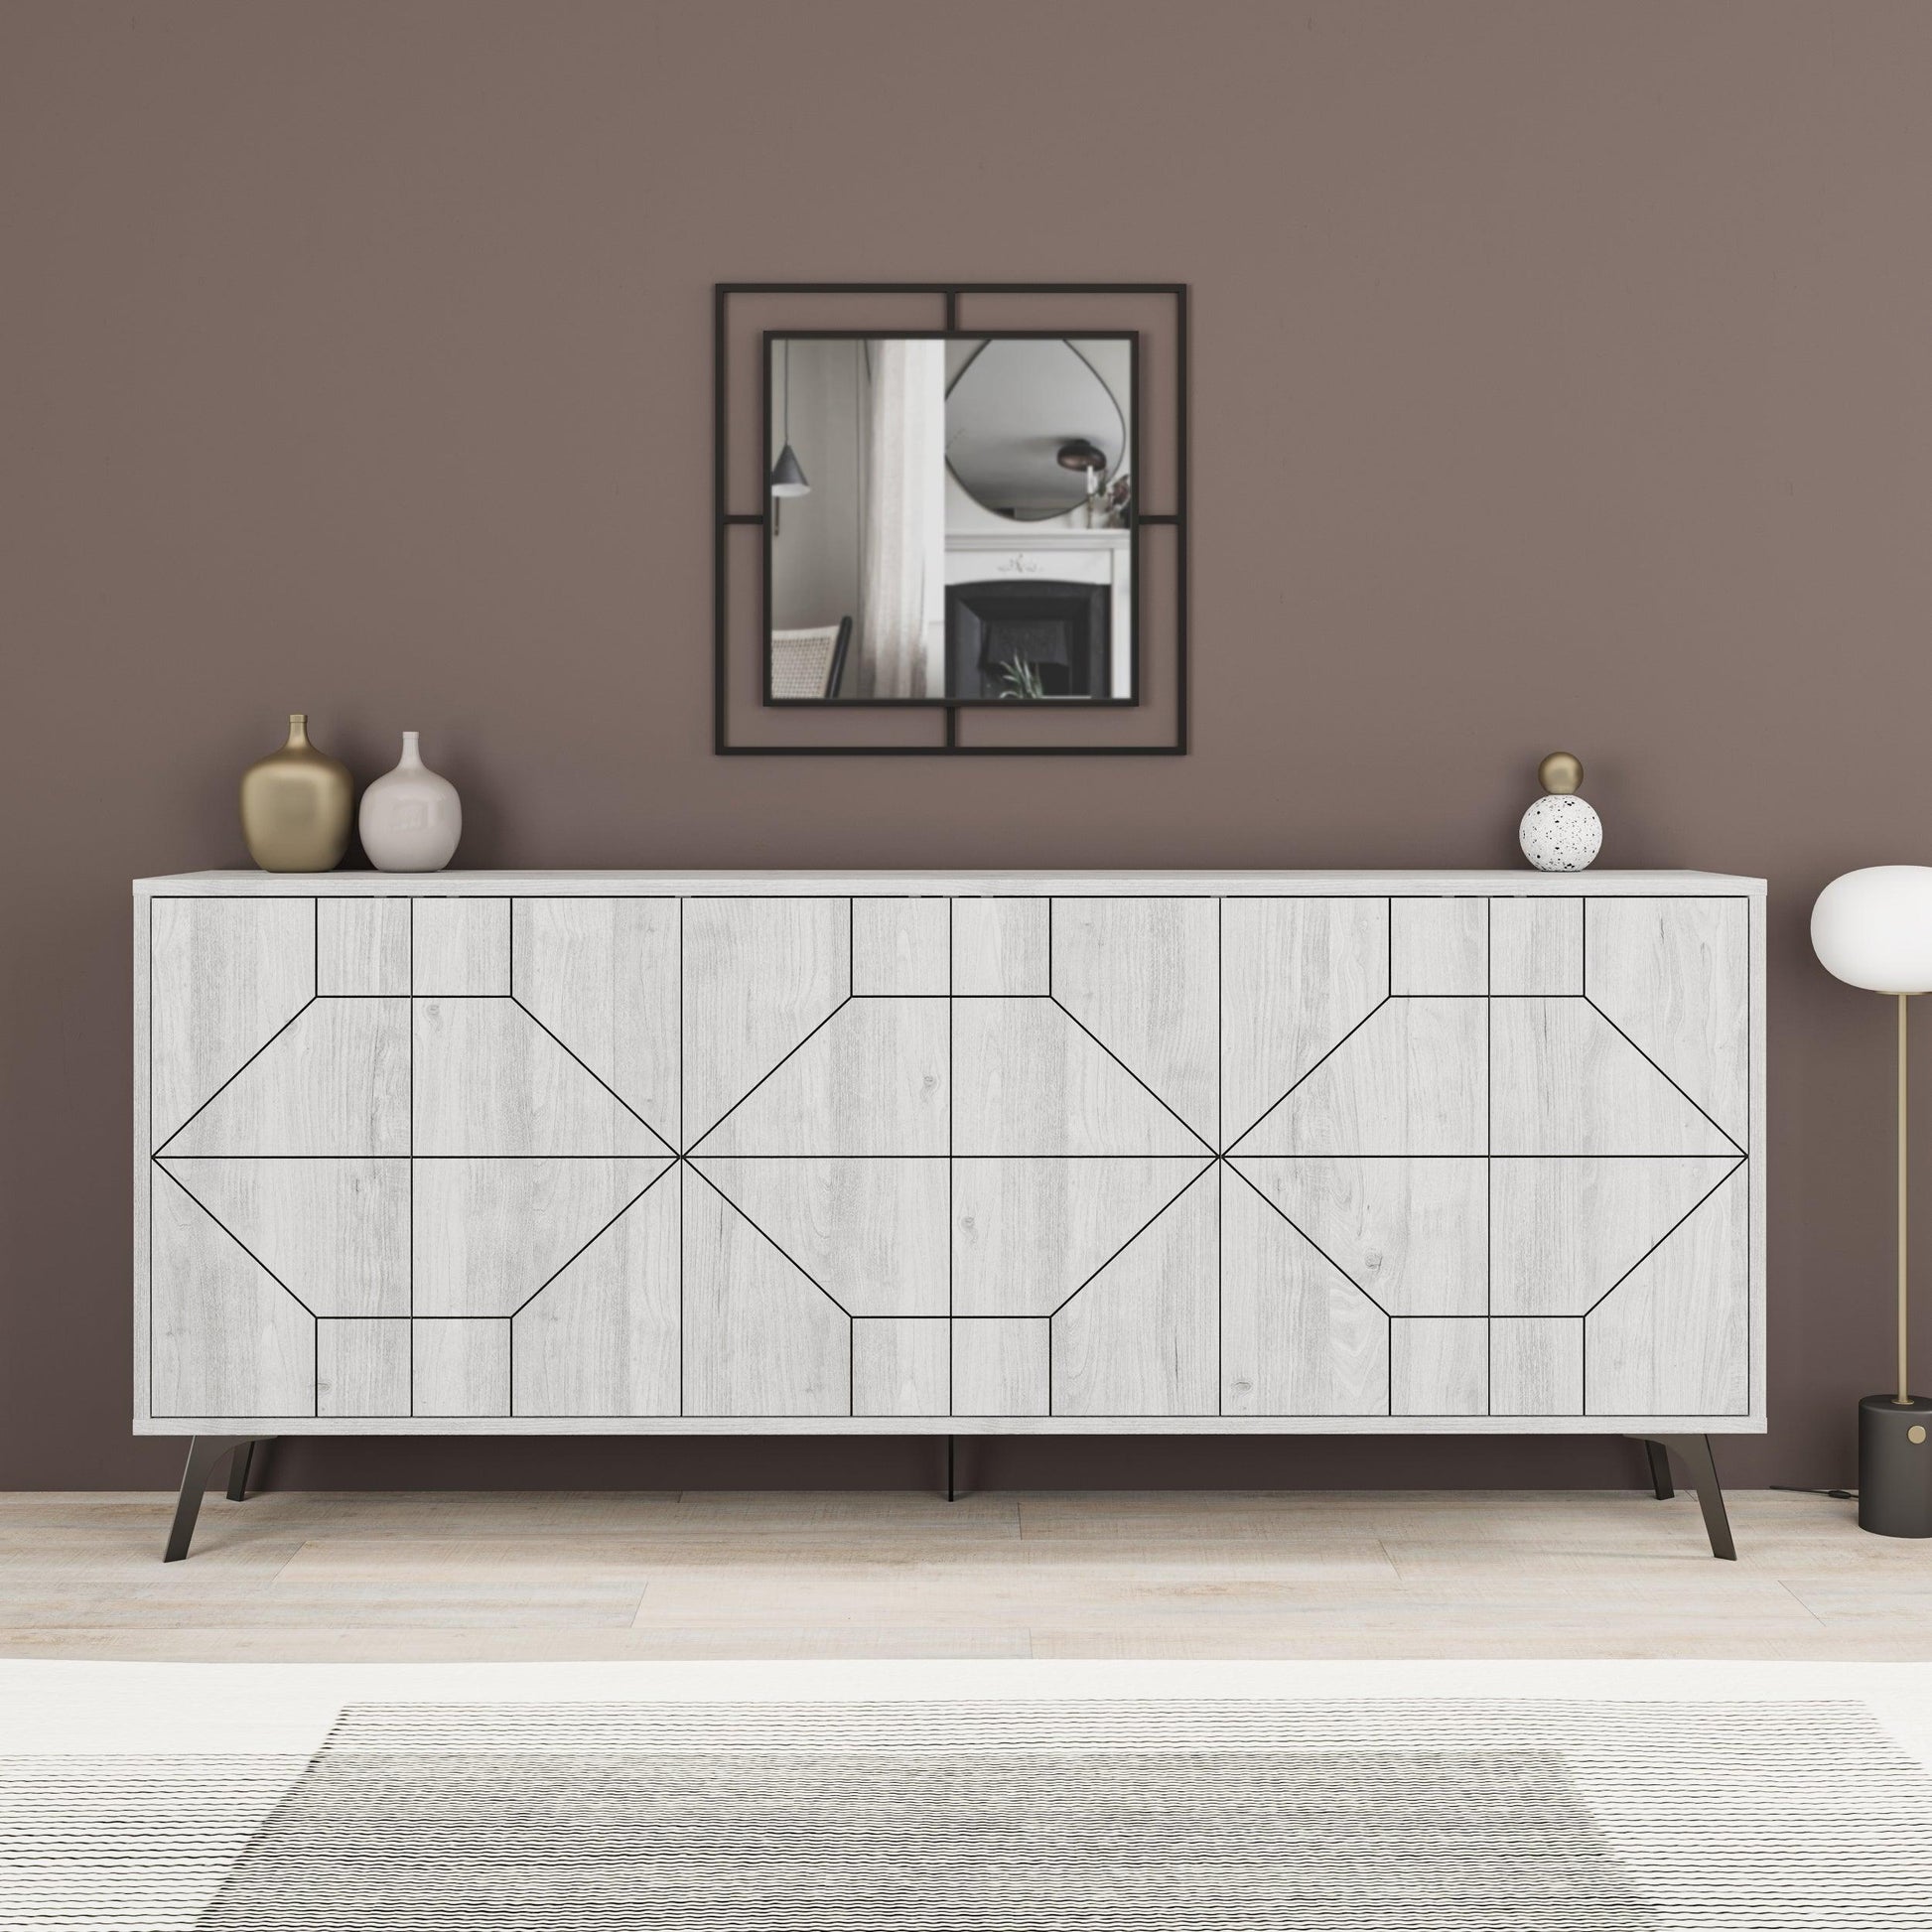 Dune Console Sideboard Display Unit 183cm - Decortie